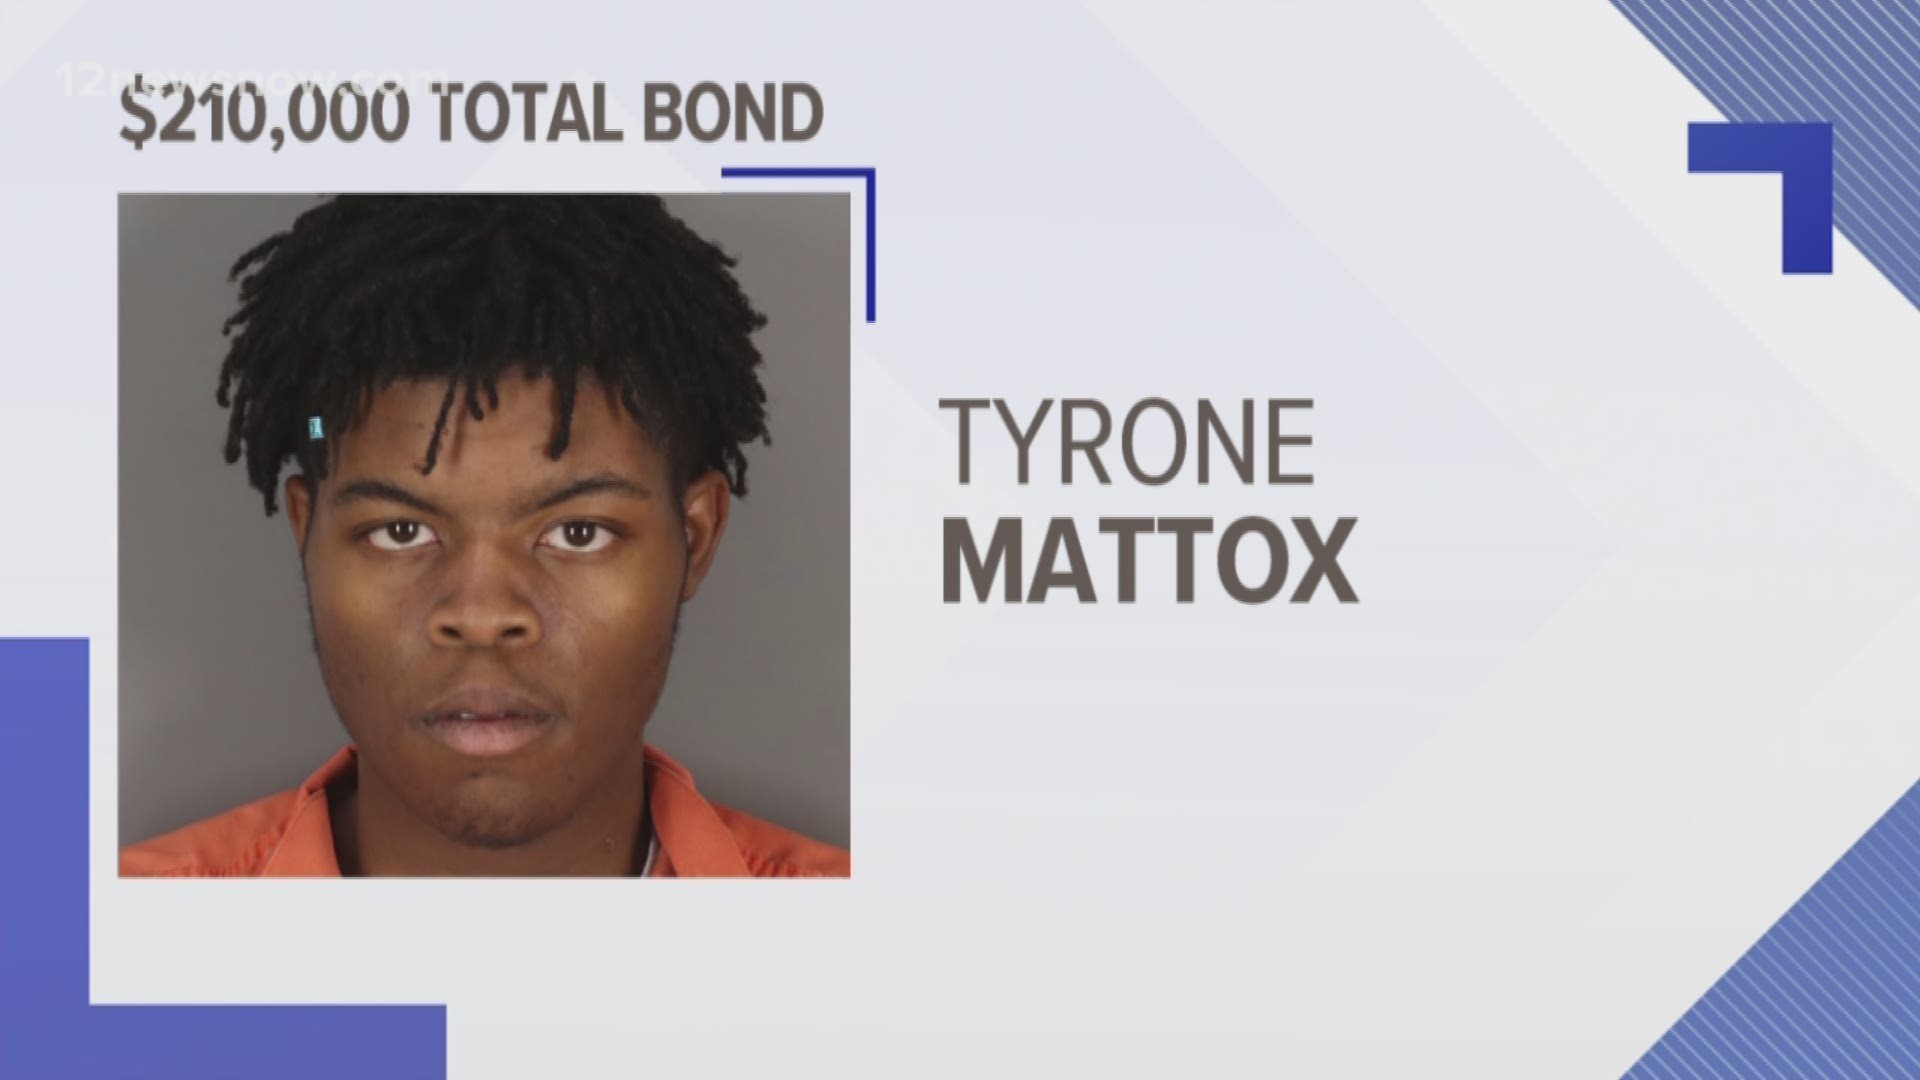 Tyrone Mattox is also accused of assaulting his ex-girlfriend